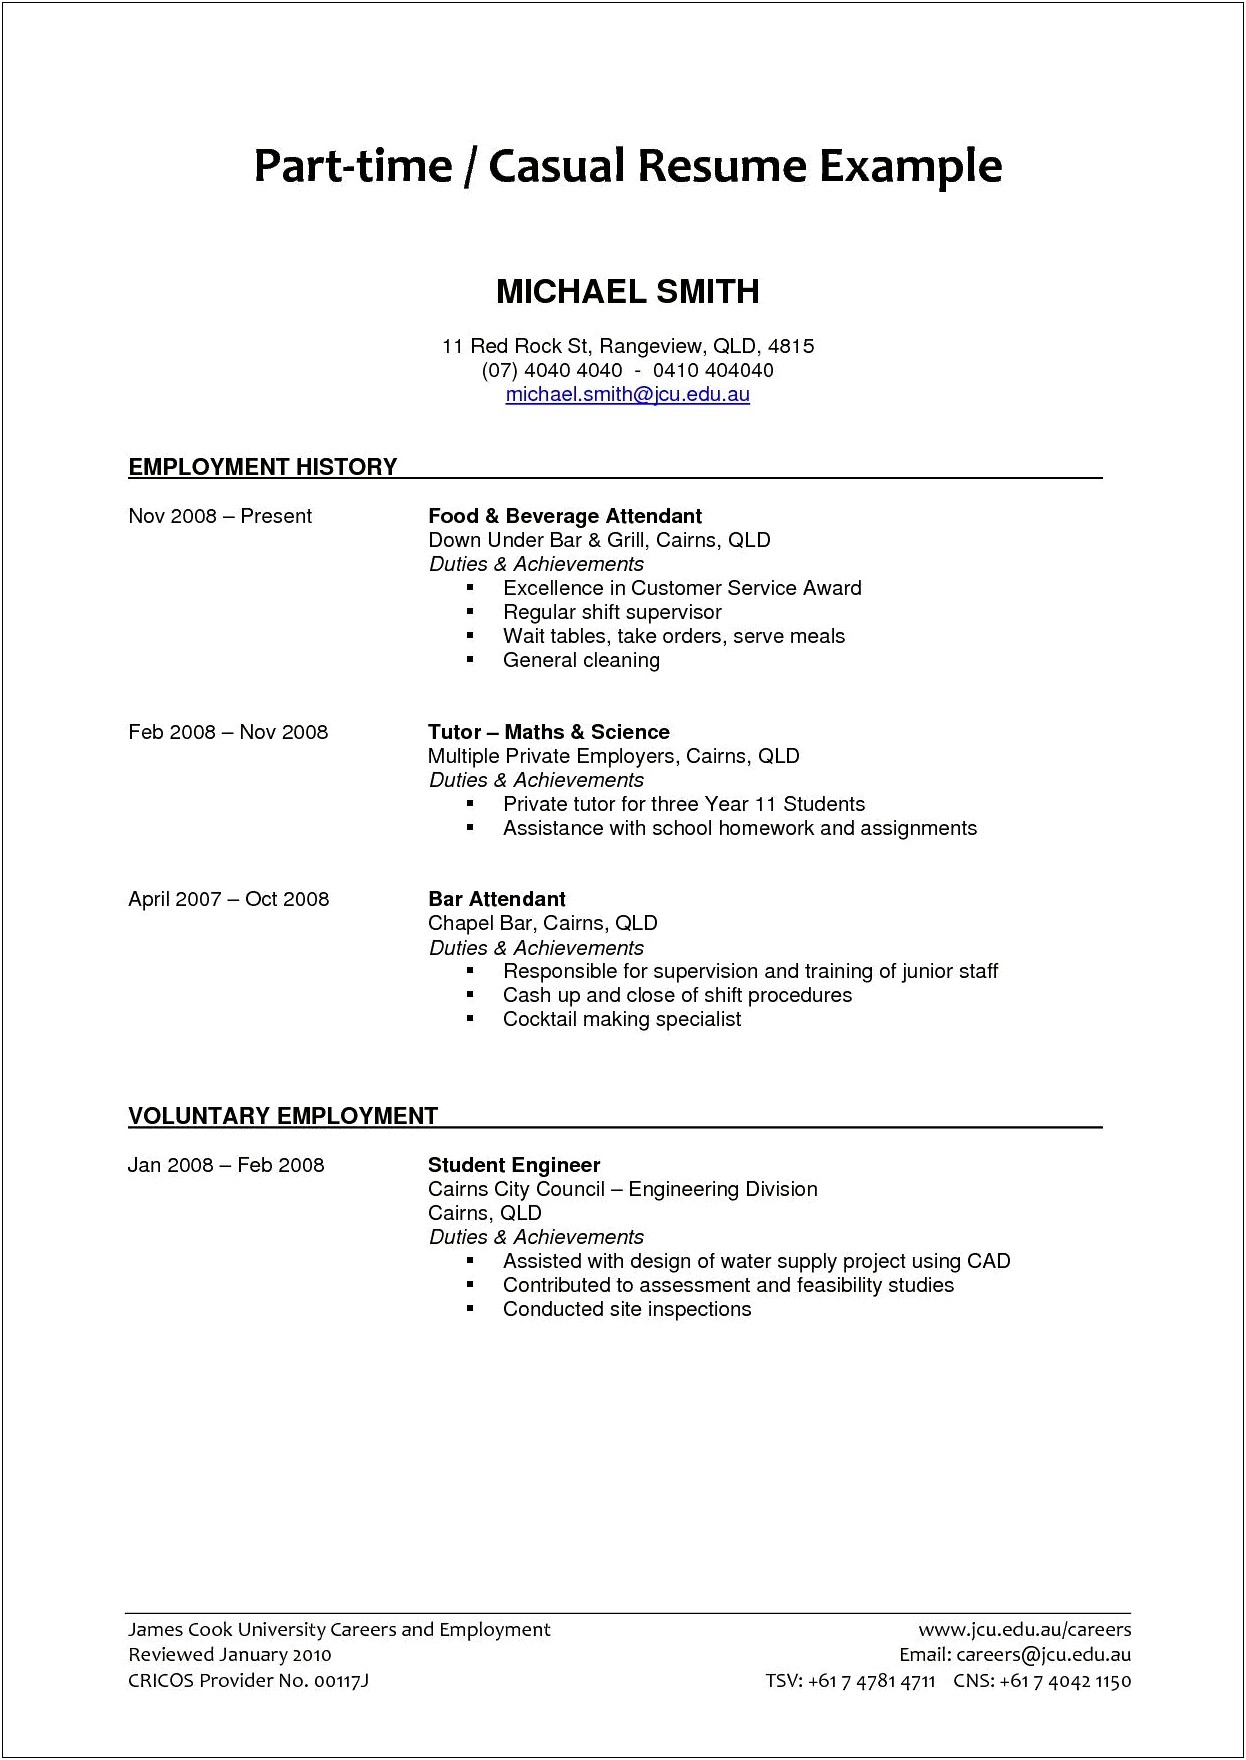 General Resume For Part Time Job